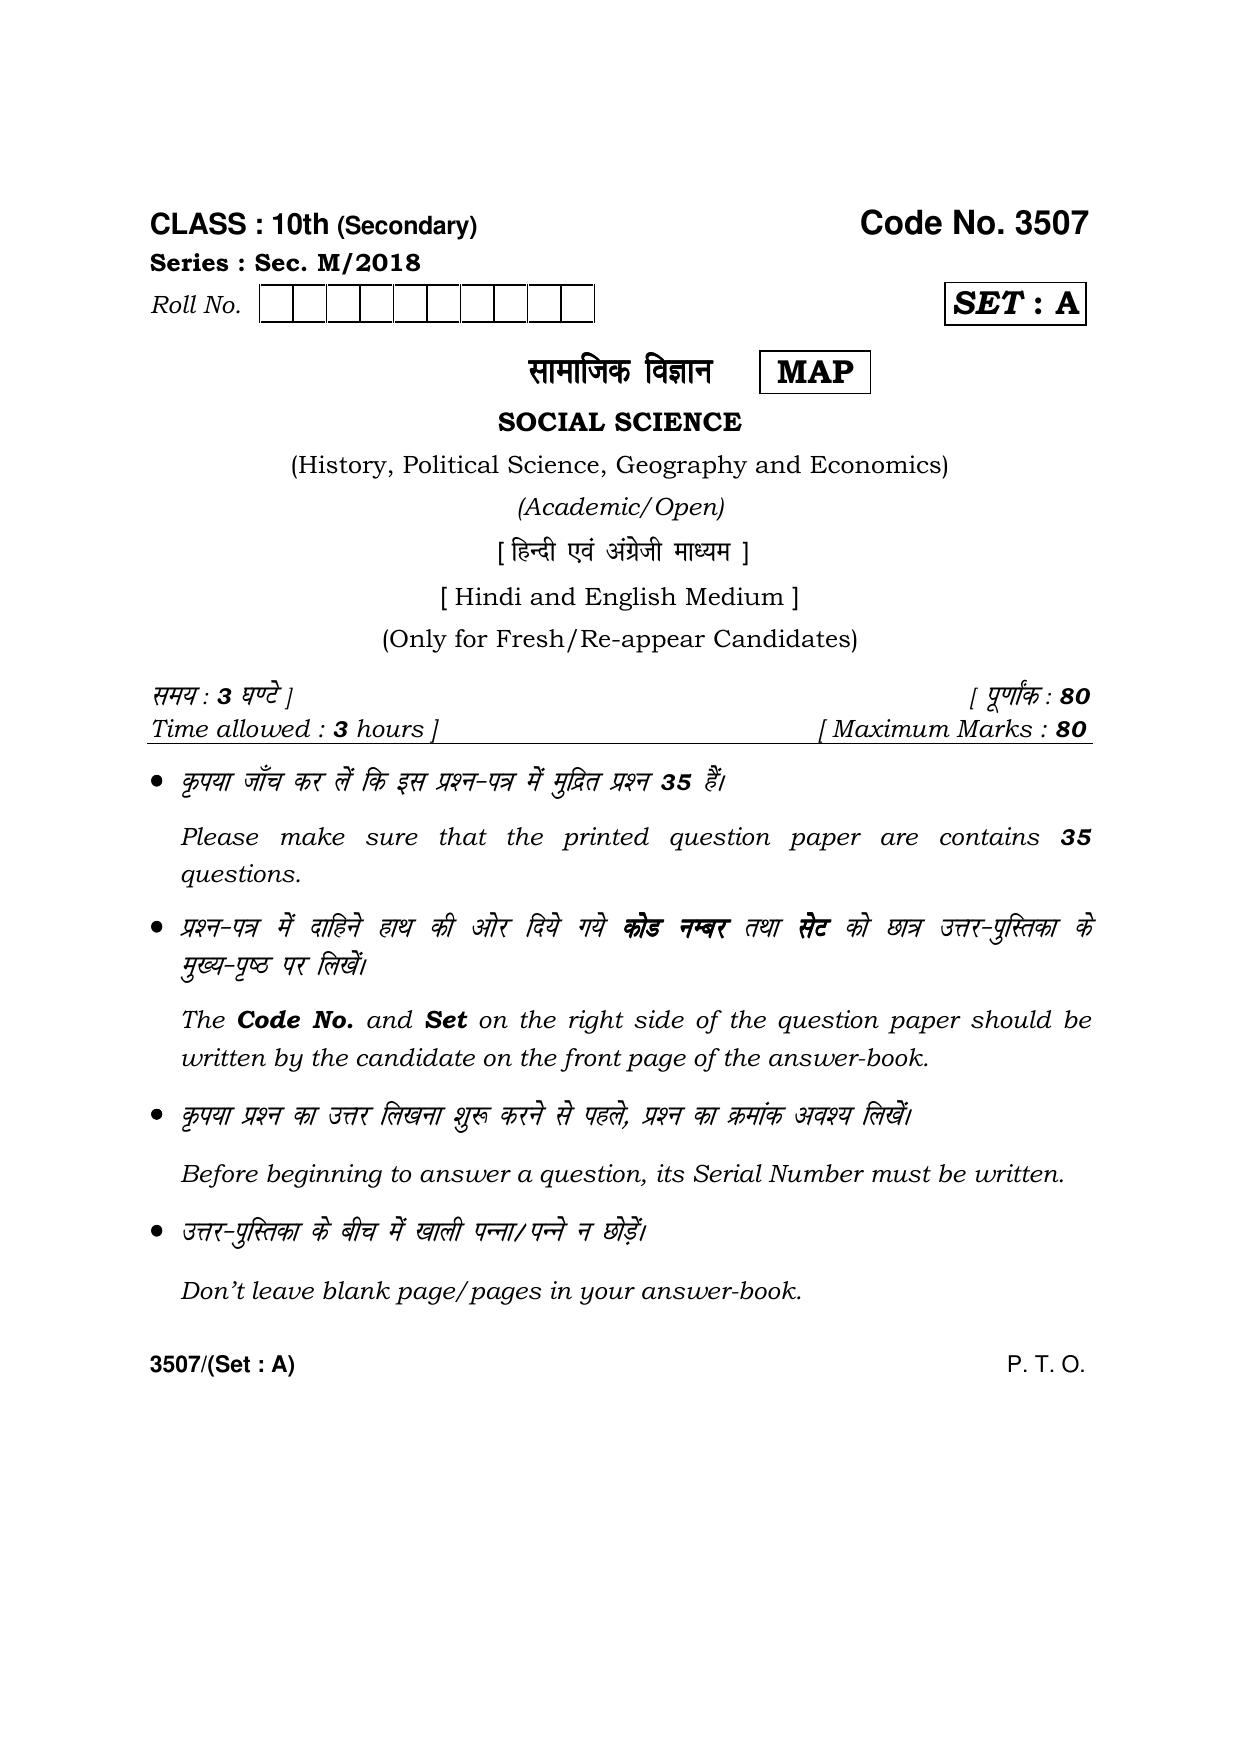 Haryana Board HBSE Class 10 Social Science -A 2018 Question Paper - Page 1